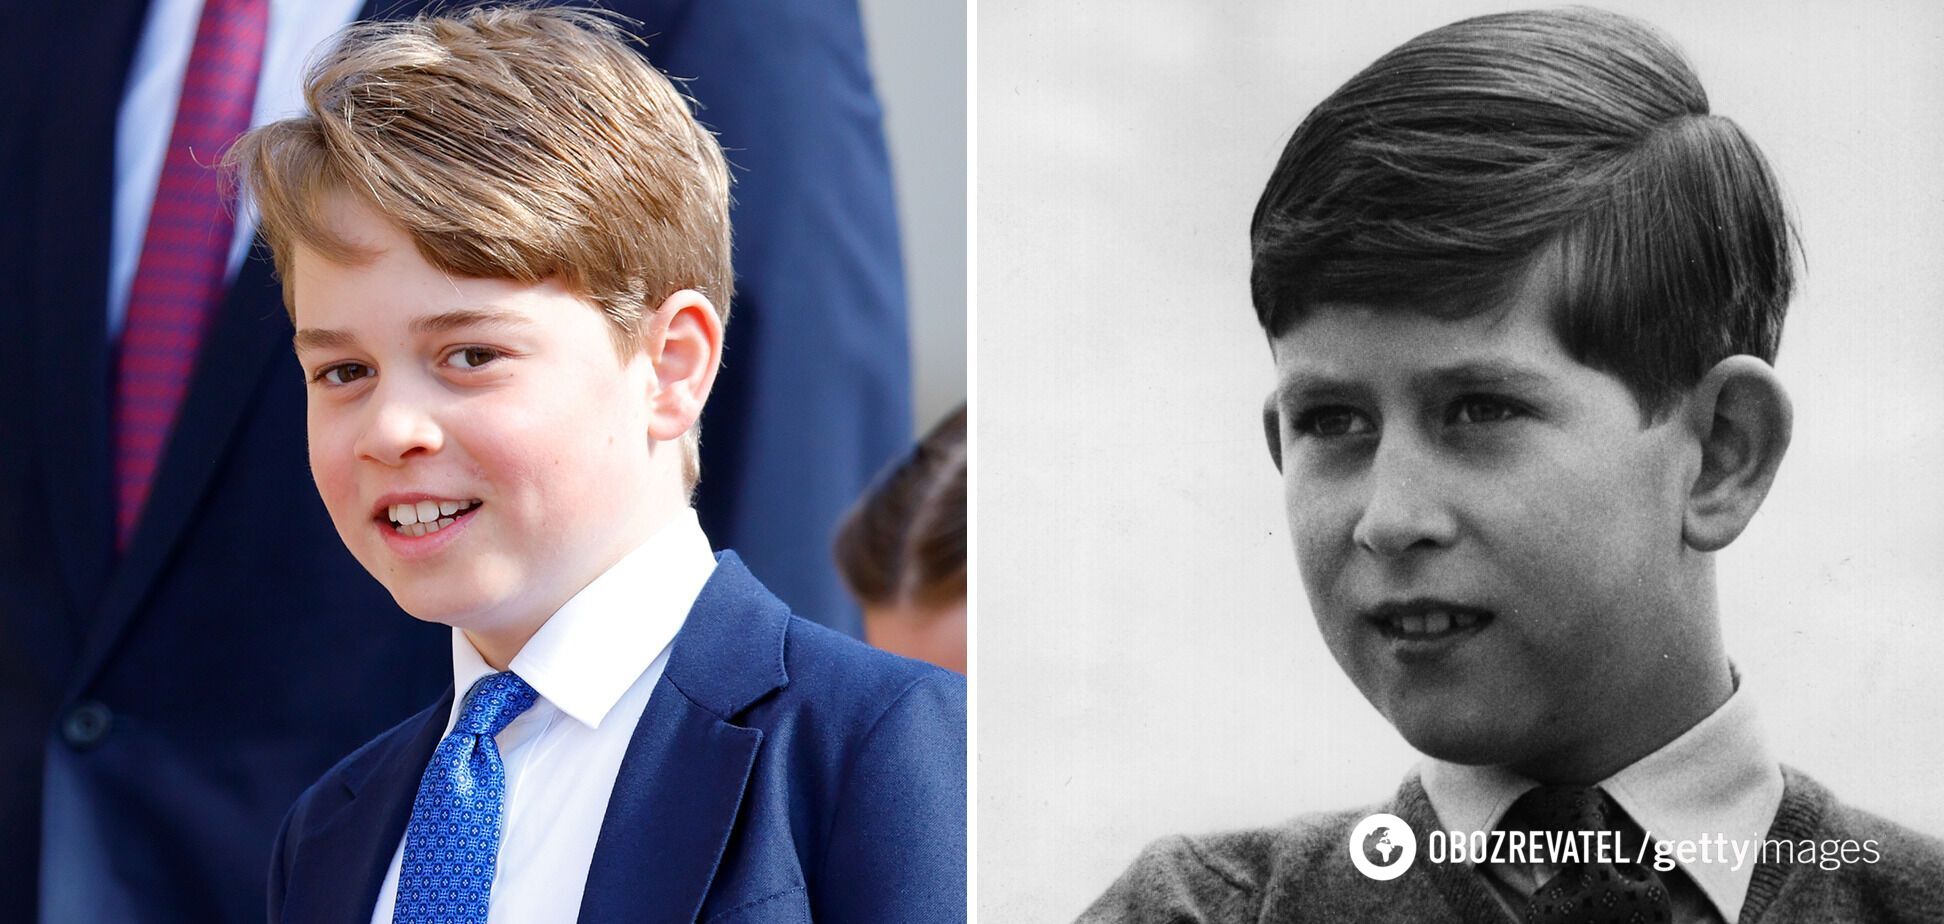 A copy of Charles III. Royal fans have noticed the striking resemblance between 10-year-old Prince George and his grandfather at the same age